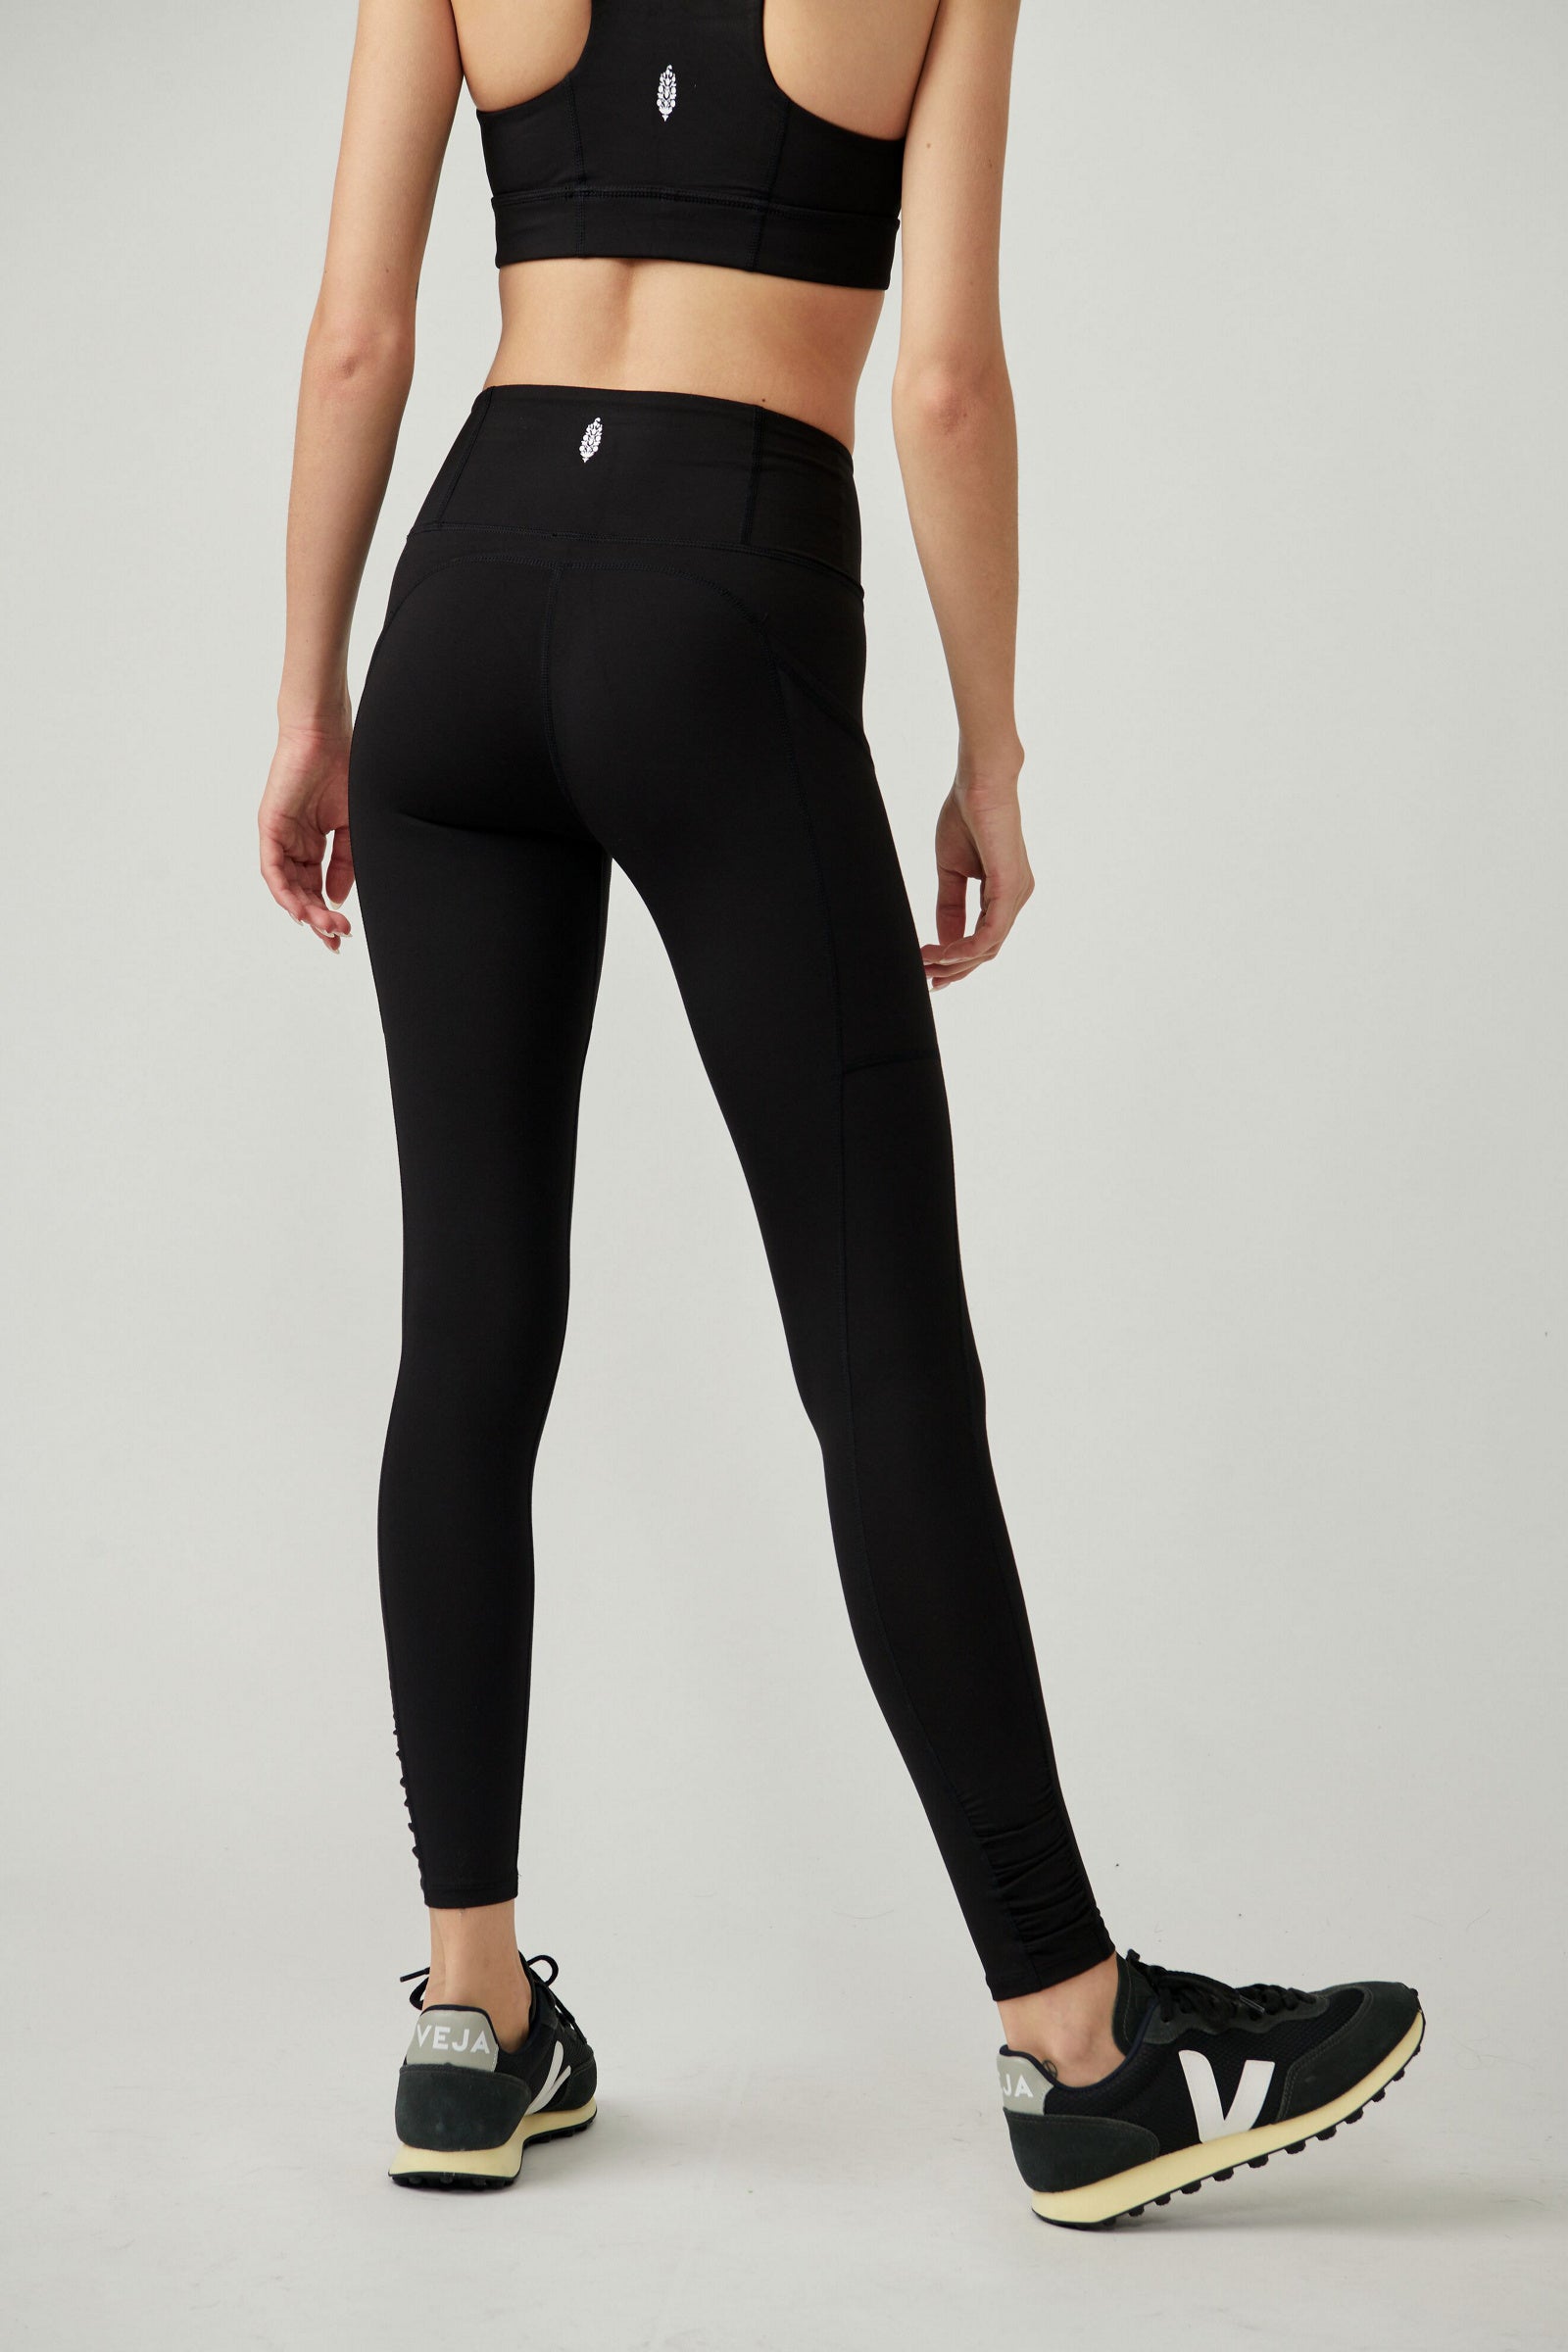 FREE PEOPLE FP Movement - Don't Be Square Crop Leggings in Black